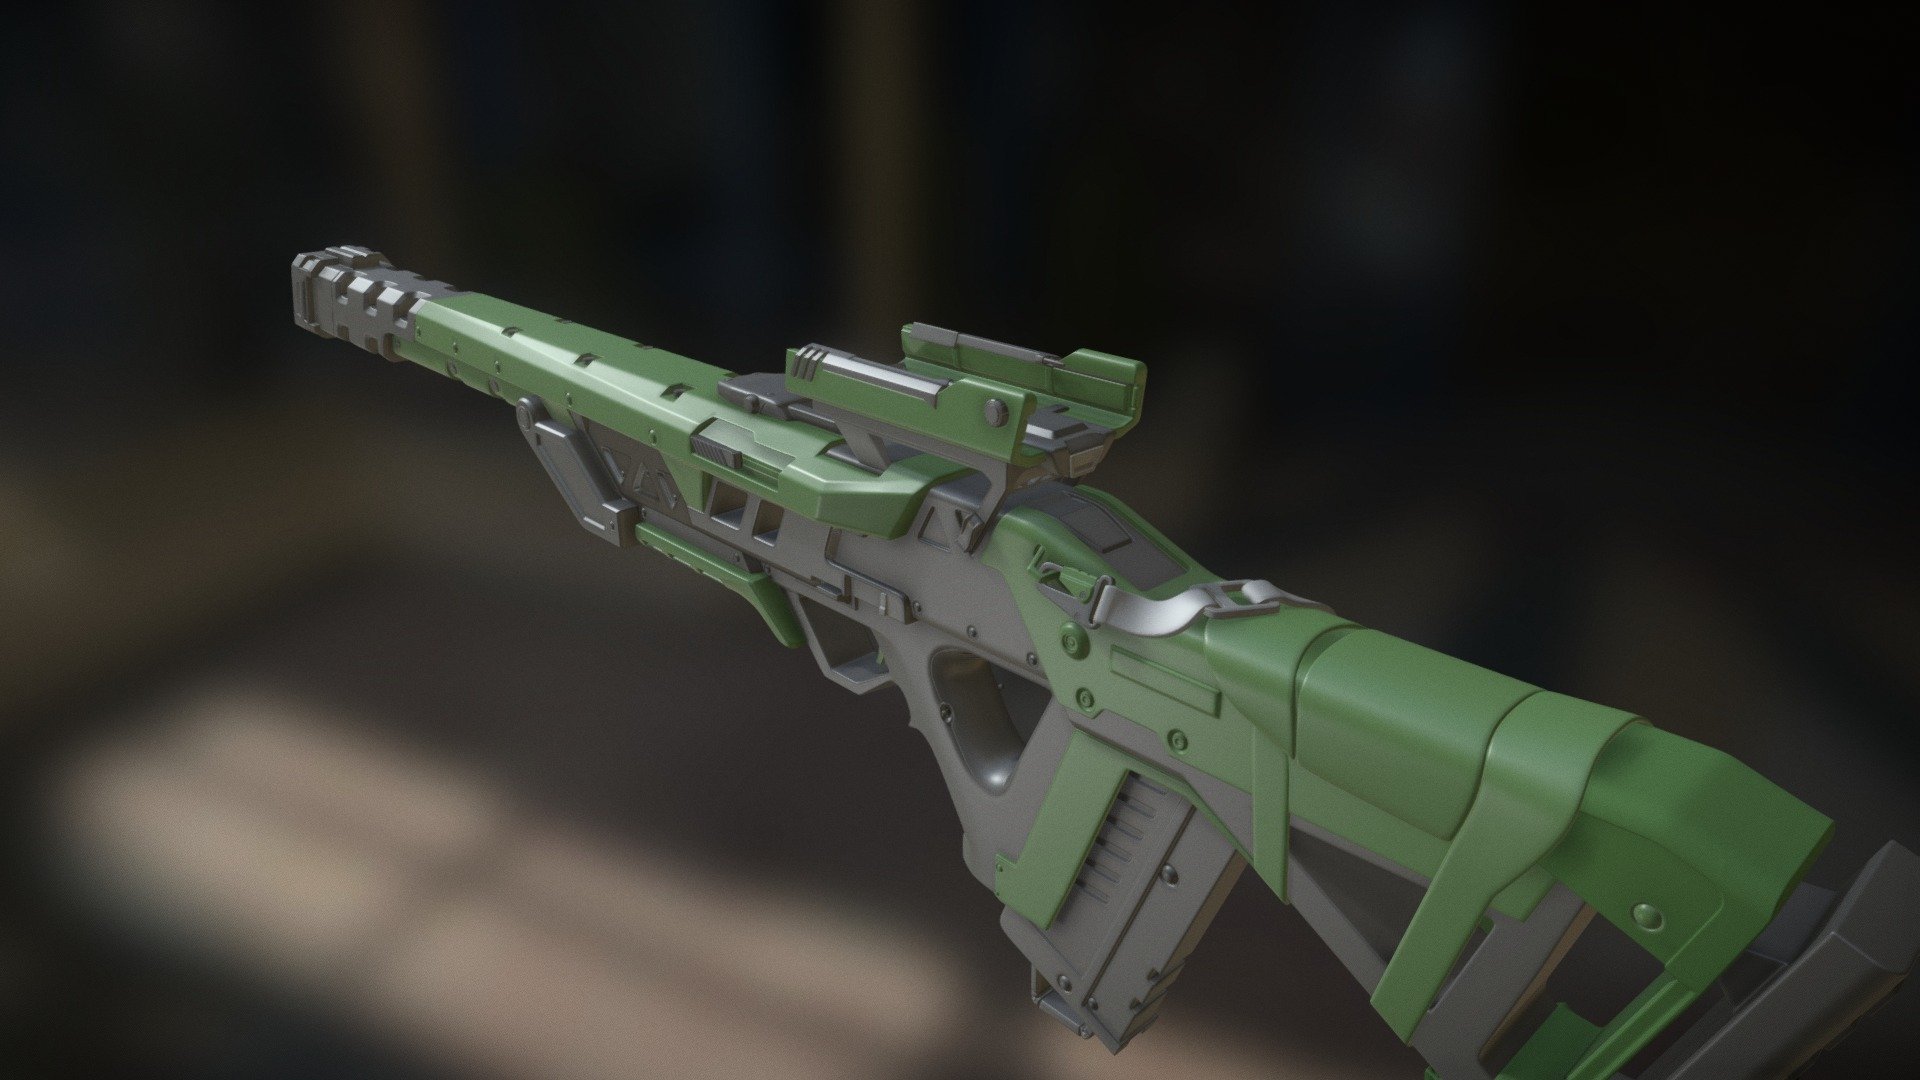 Triple Take from Apex legends High-poly model